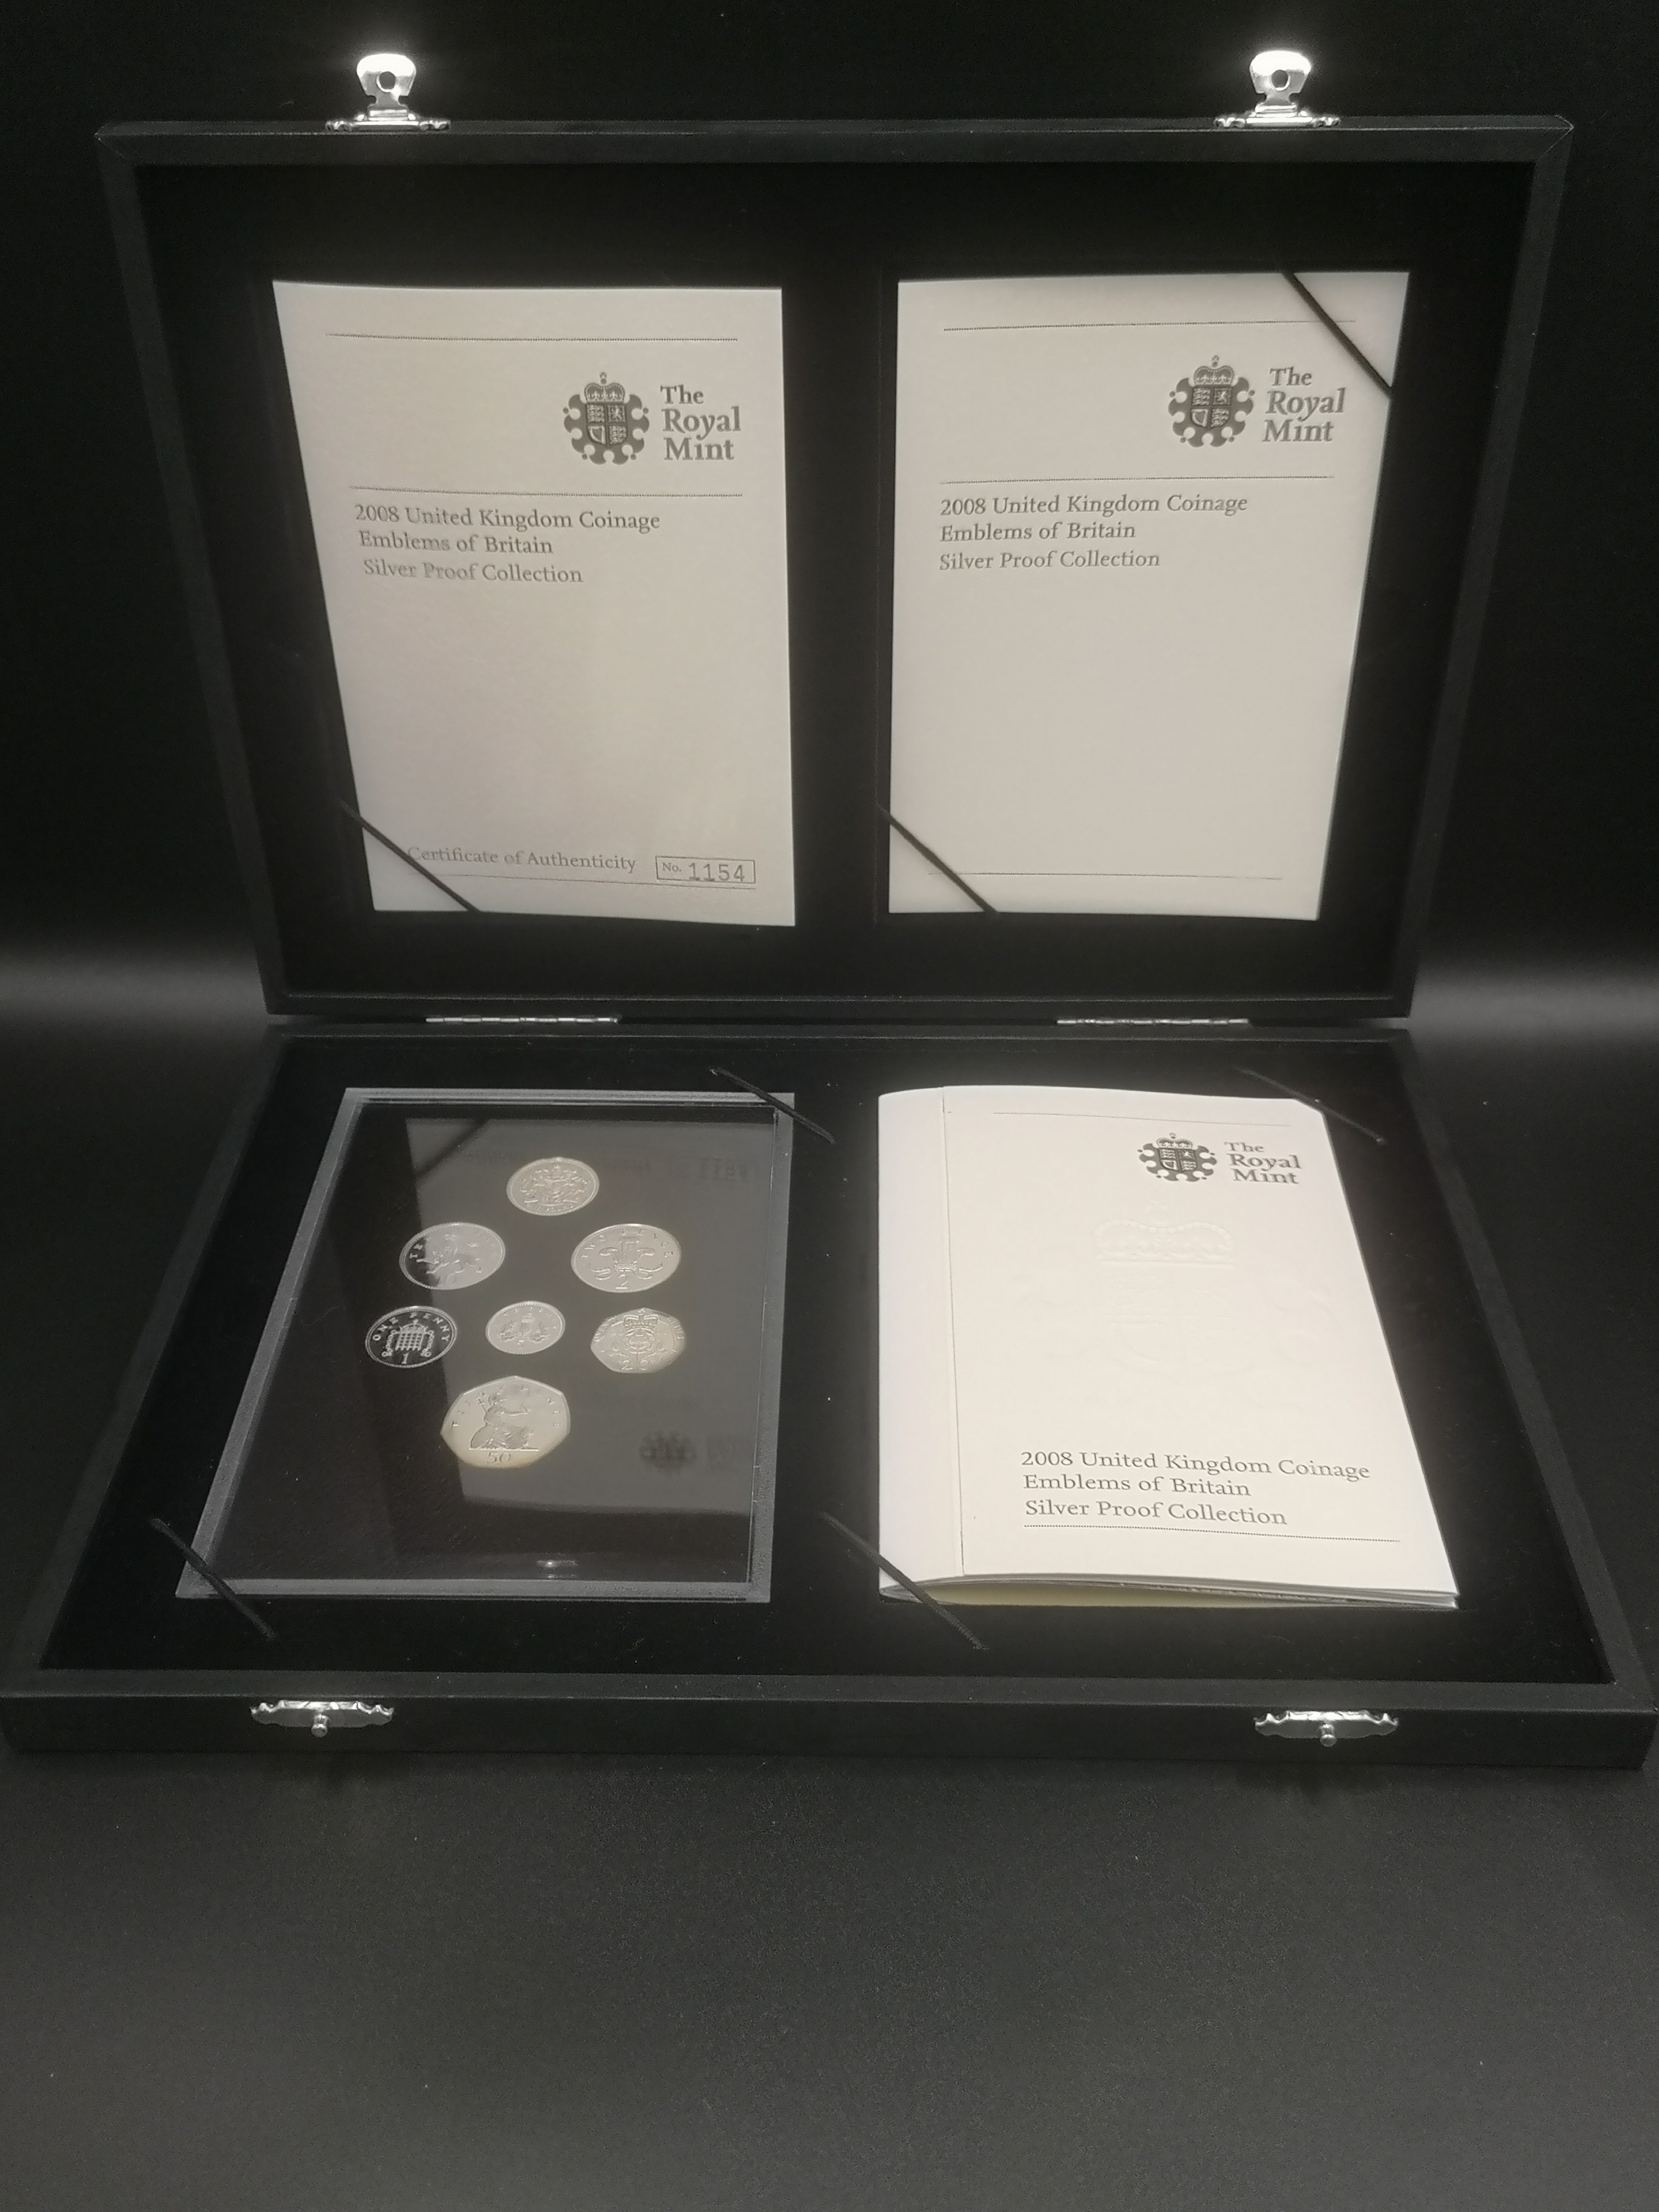 Royal Mint silver proof collection